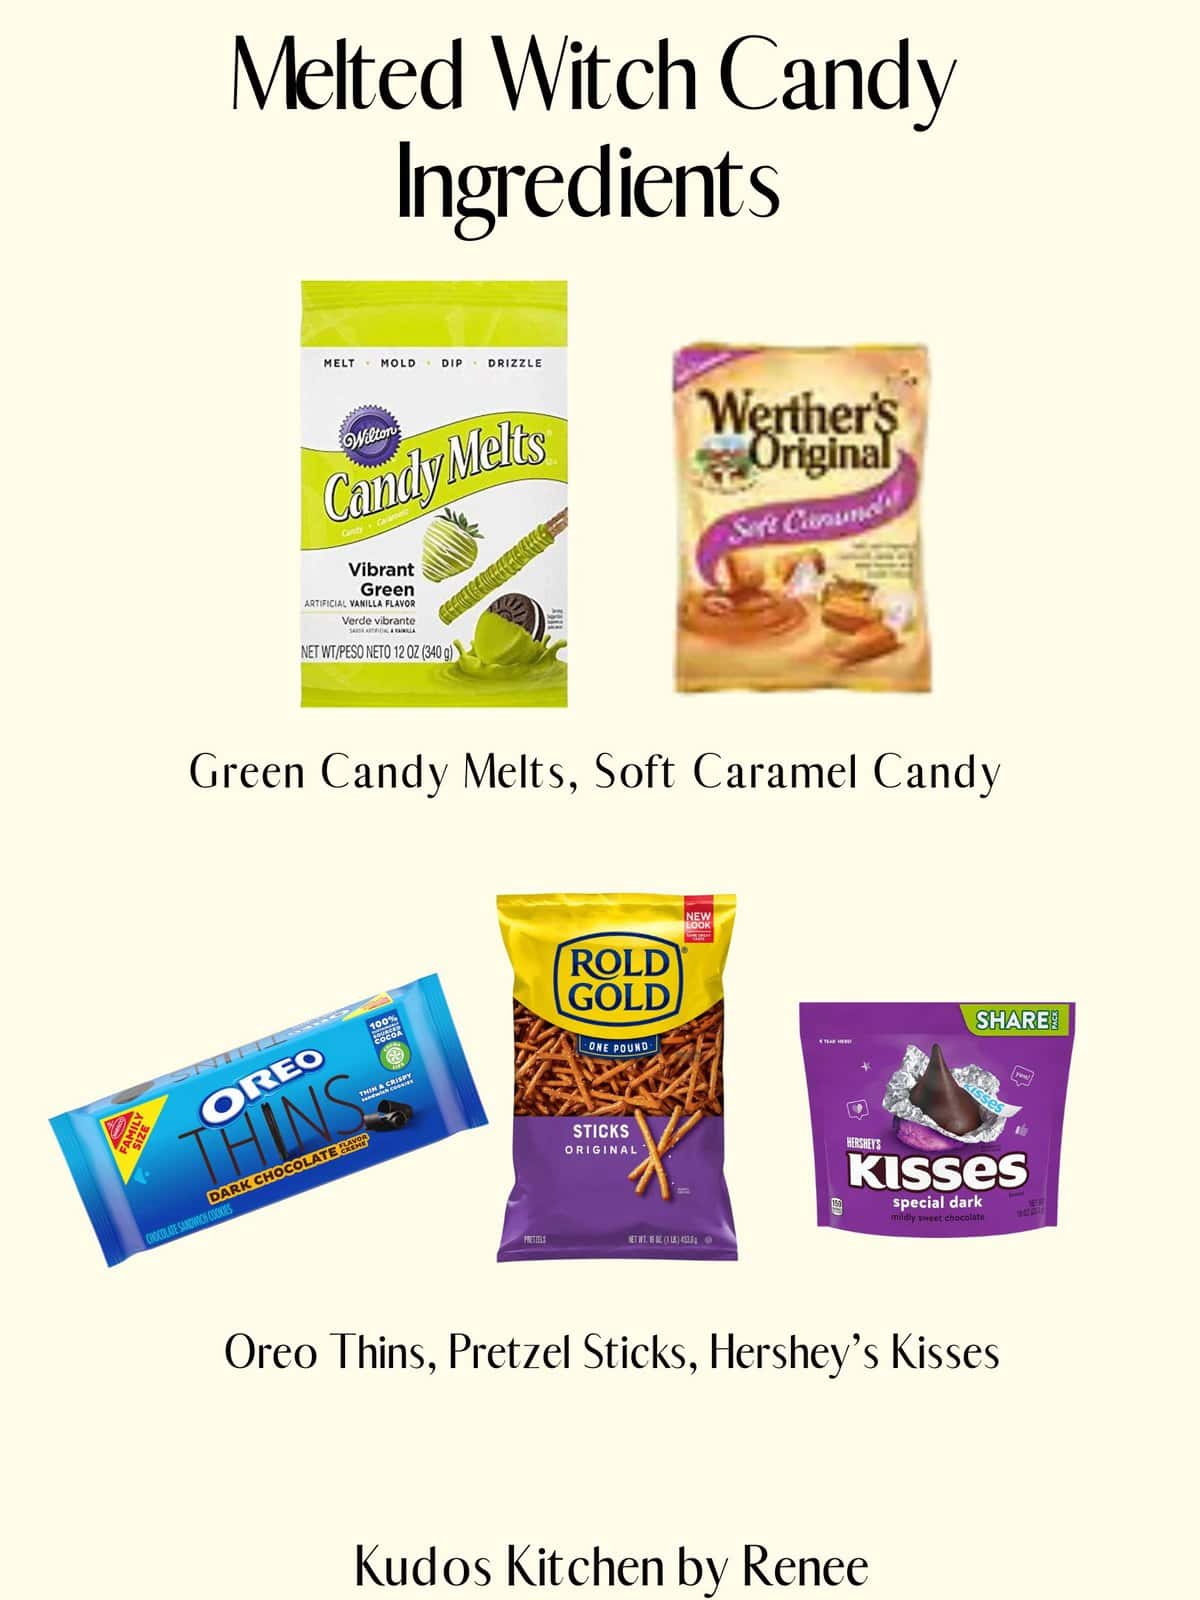 A visual ingredient list for what it takes to make Melted Witch Candy.